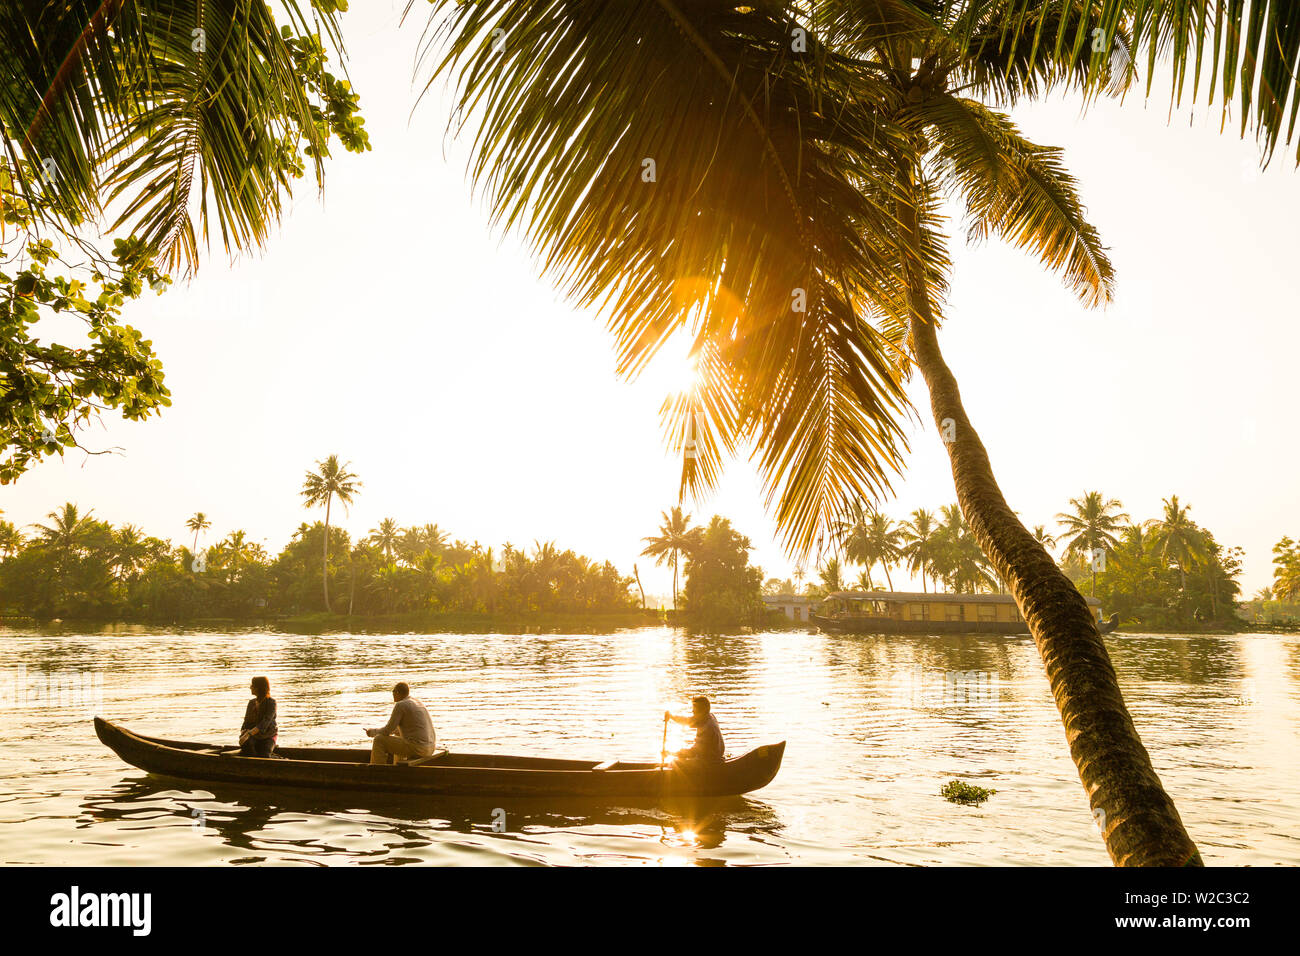 Wooden canoe in Kerala backwaters, nr Alleppey, (or Alappuzha), Kerala, India Stock Photo